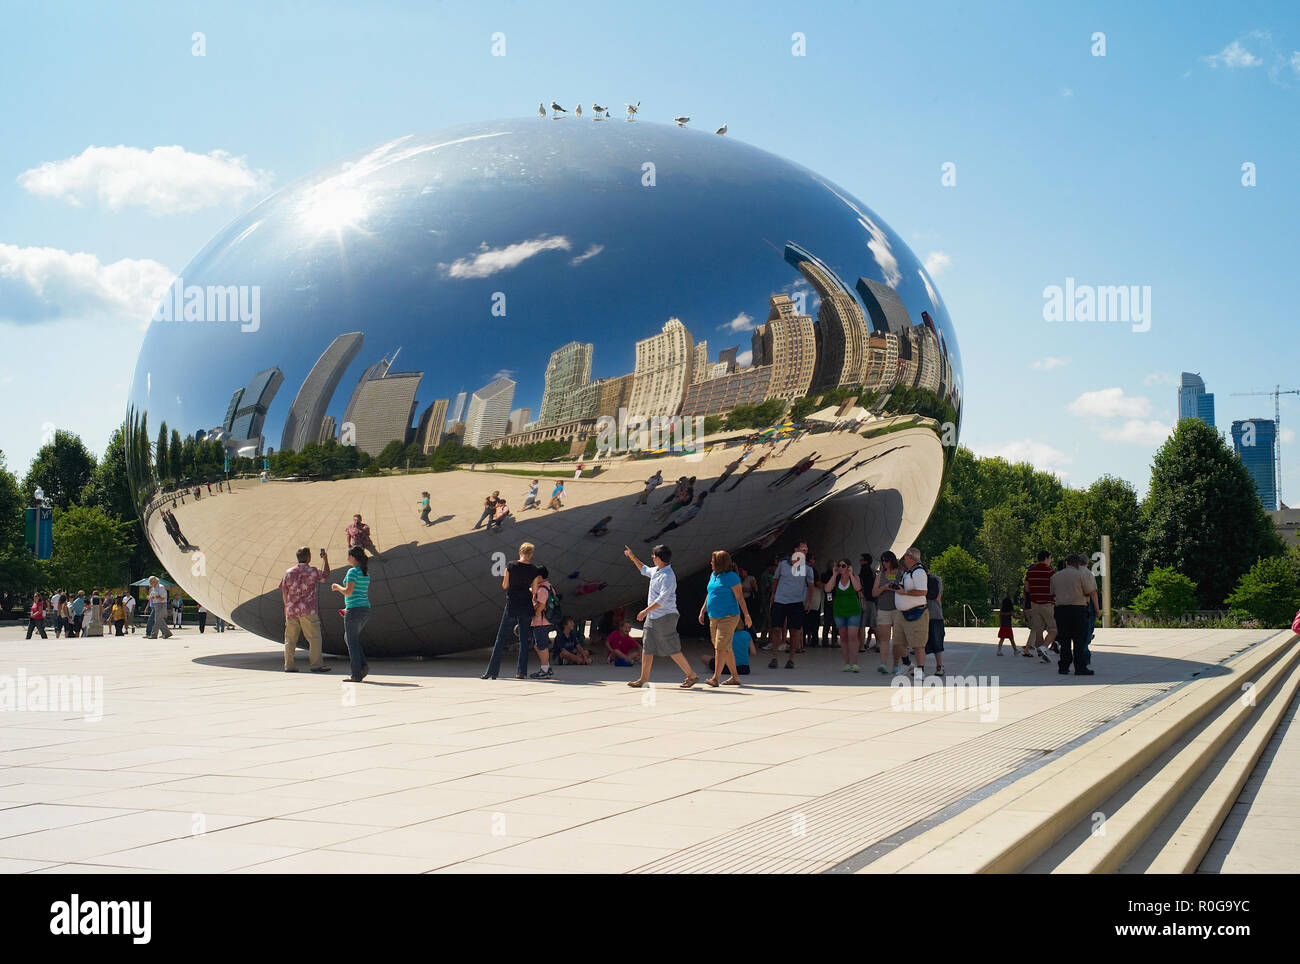 CHICAGO, ILLINOIS, USA - JULY 25, 2009: Cloud Gate sculpture, also called The Bean, in AT&T Plaza on a sunny day reflecting the skyline of Chicago Stock Photo